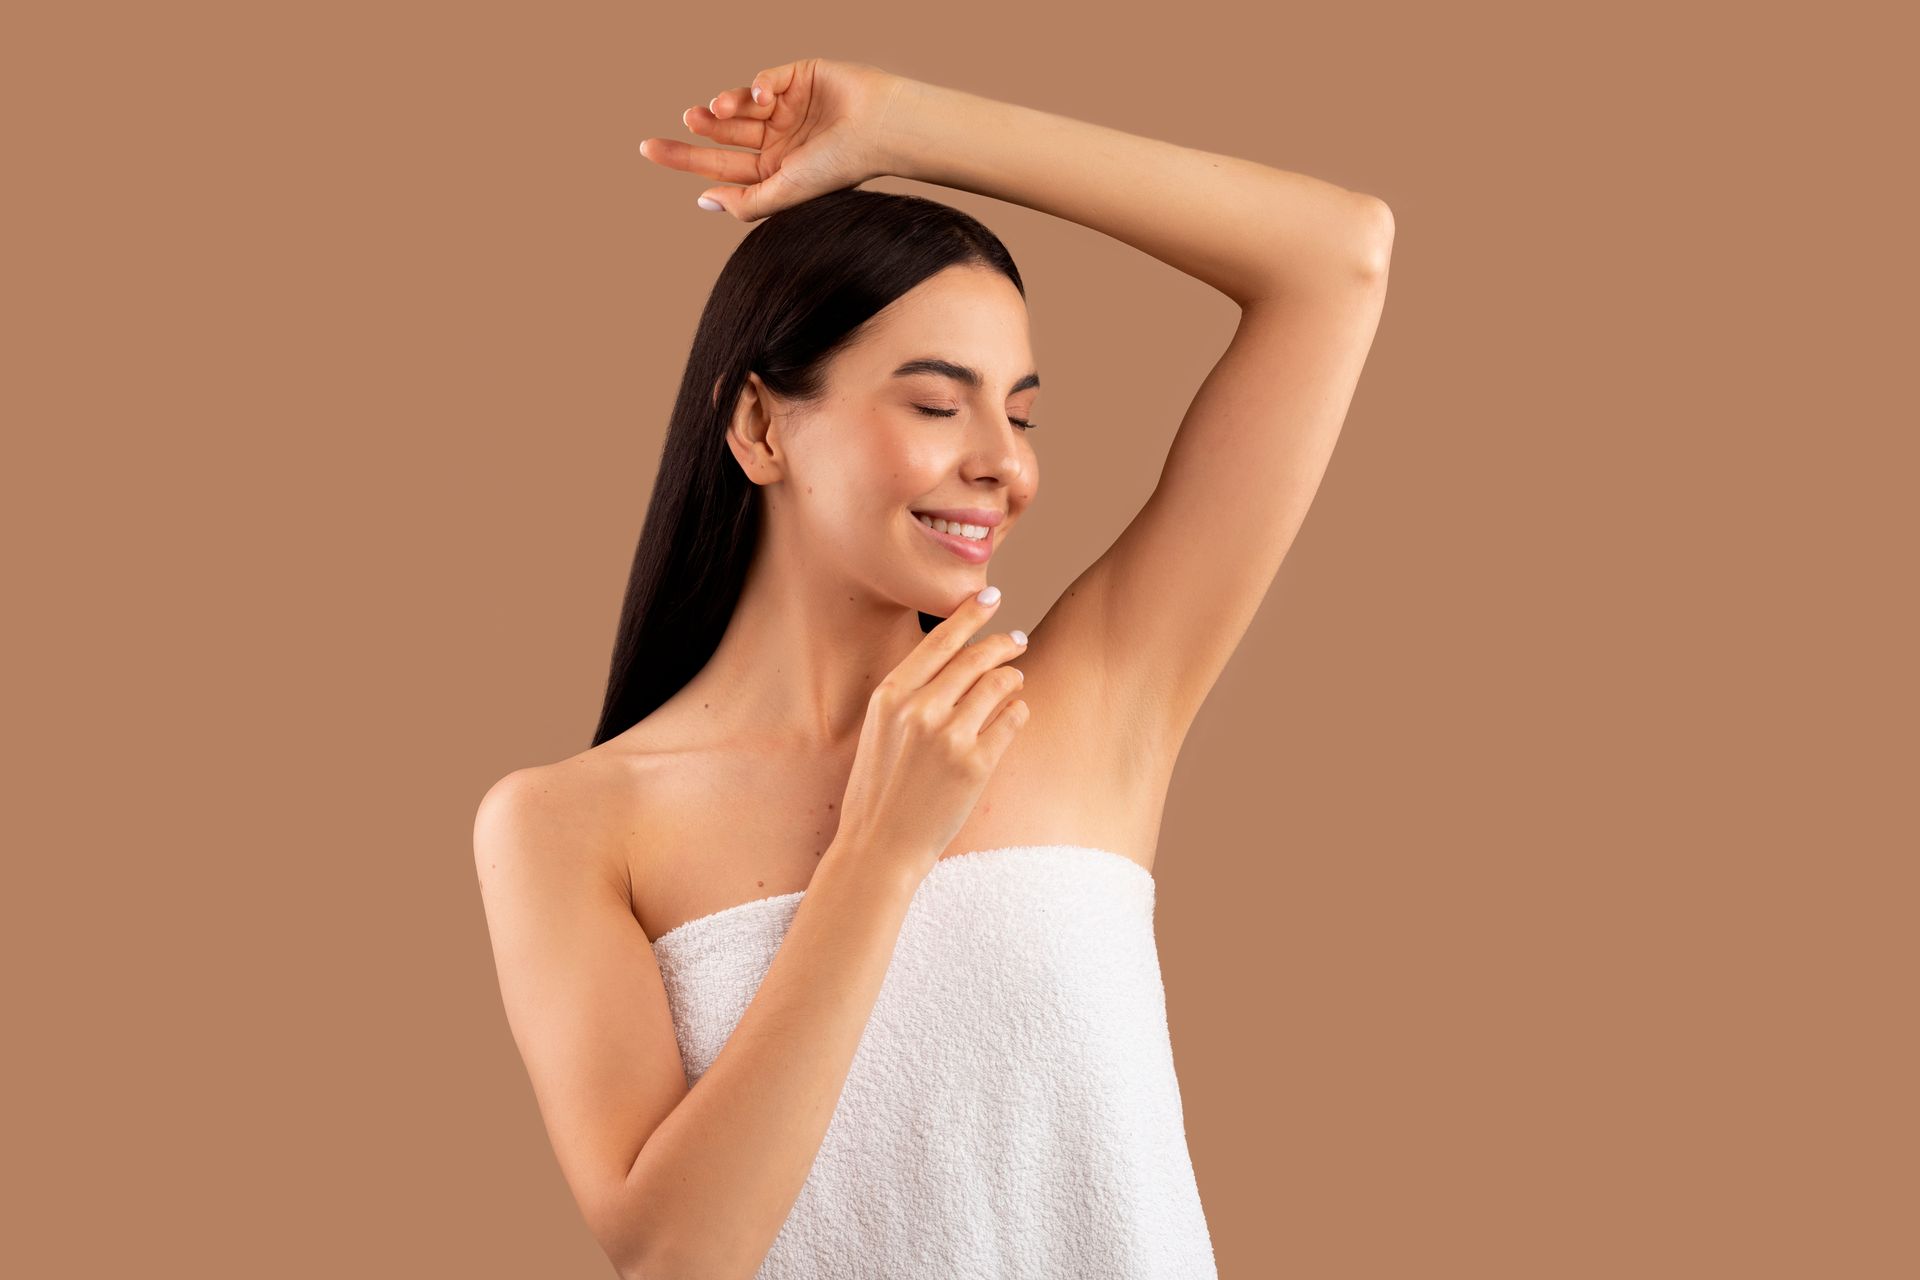 a woman wrapped in a white towel is smiling and touching her armpit